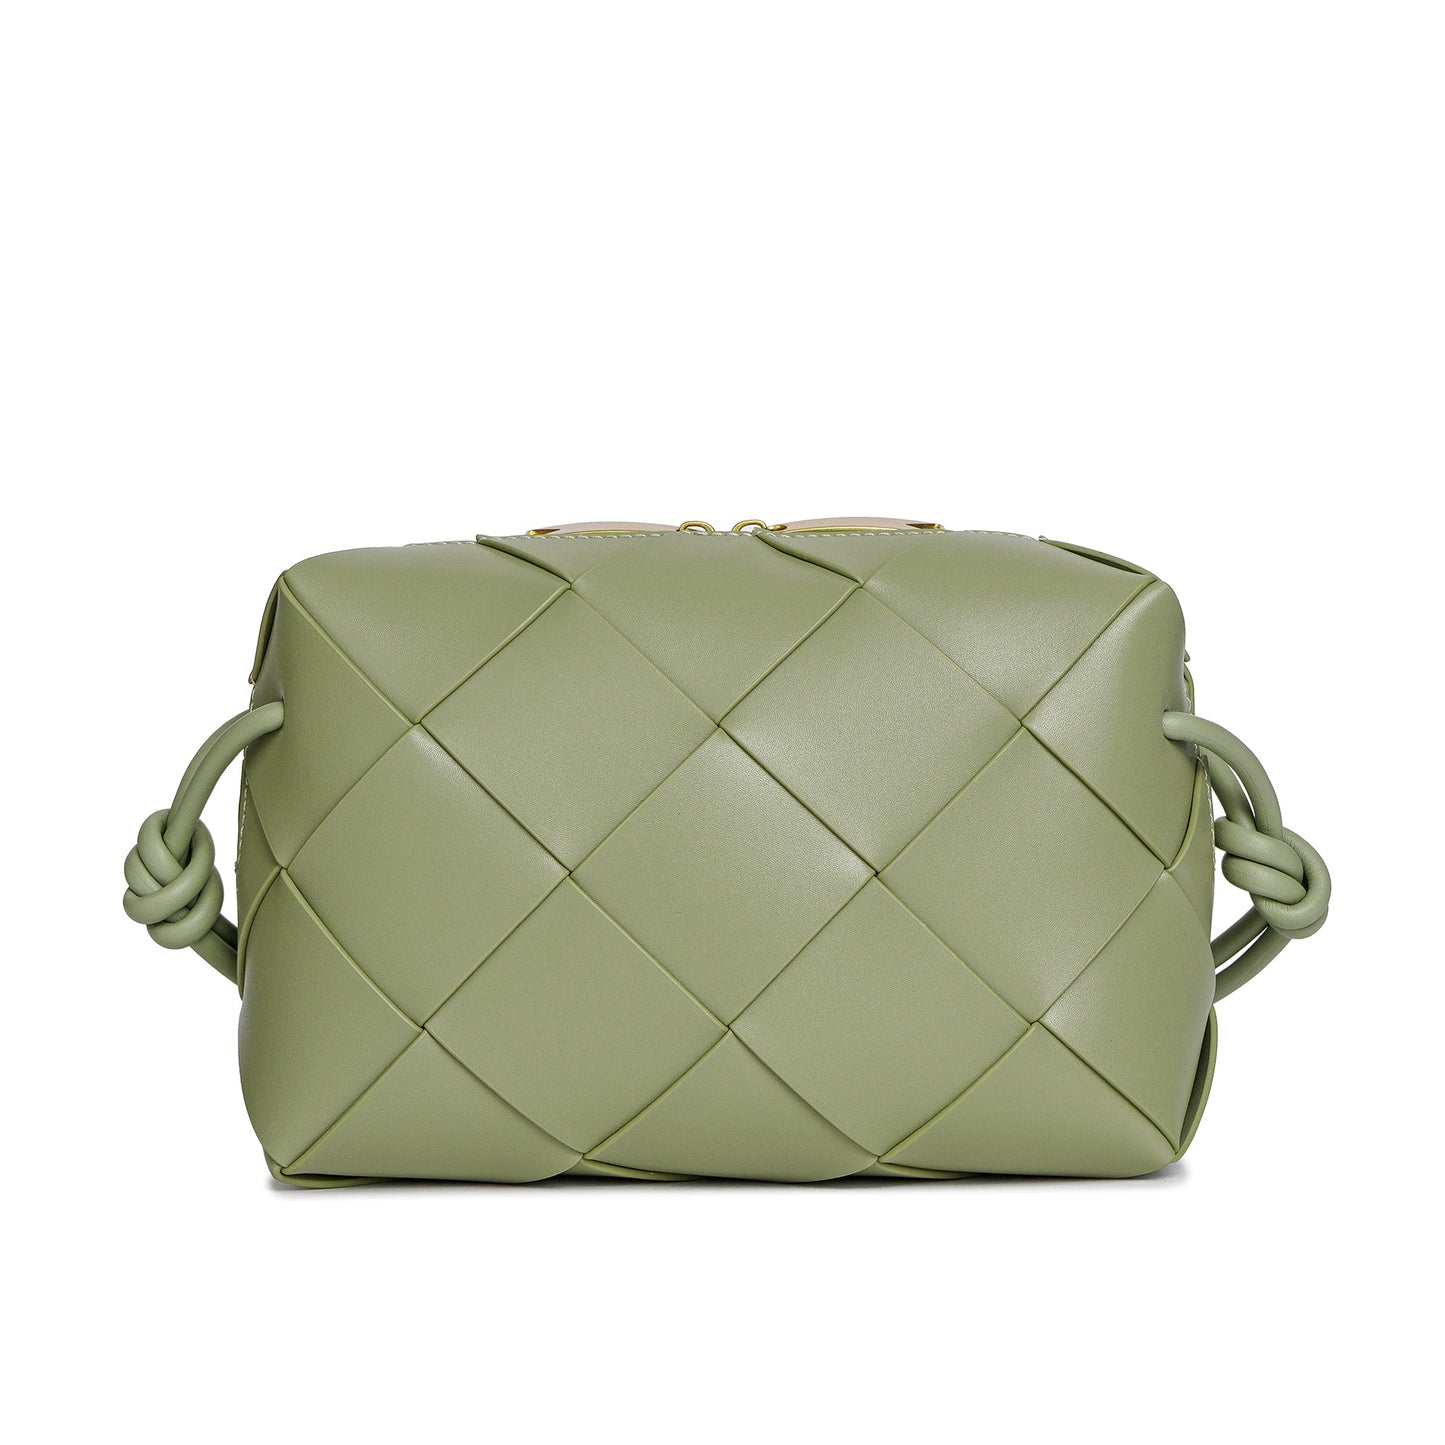 Smooth Woven Leather Top-Handle Crossbody/Shoulder Bag